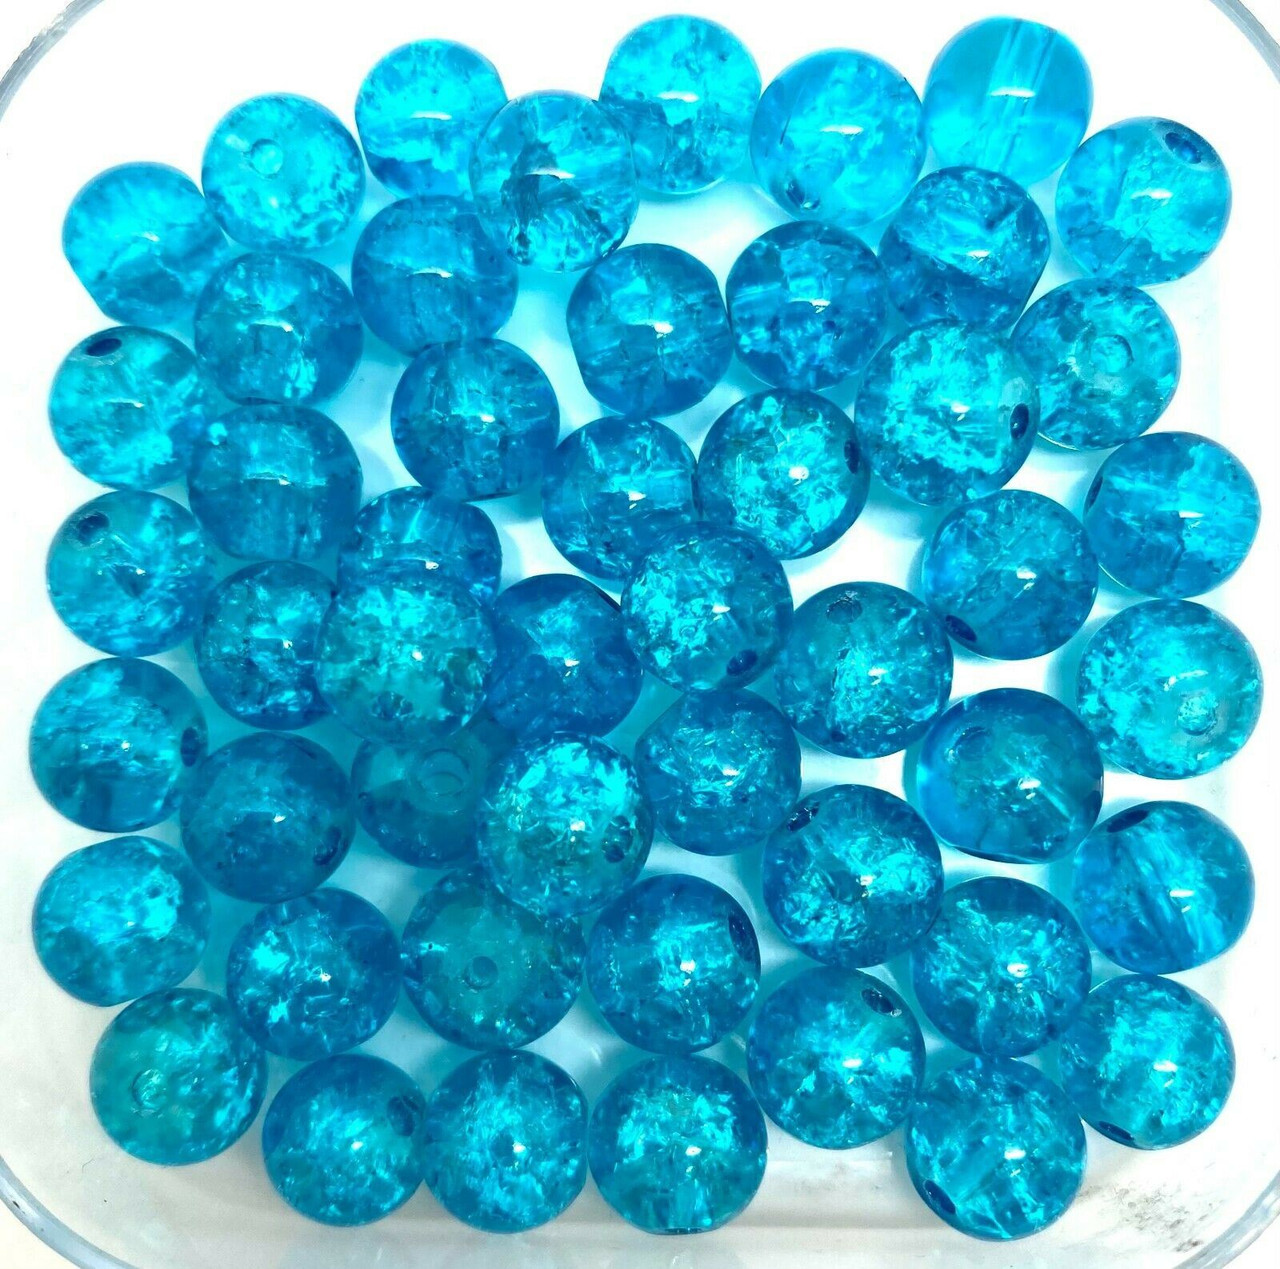 8mm Crackle Glass Beads - Turquoise, 50 beads